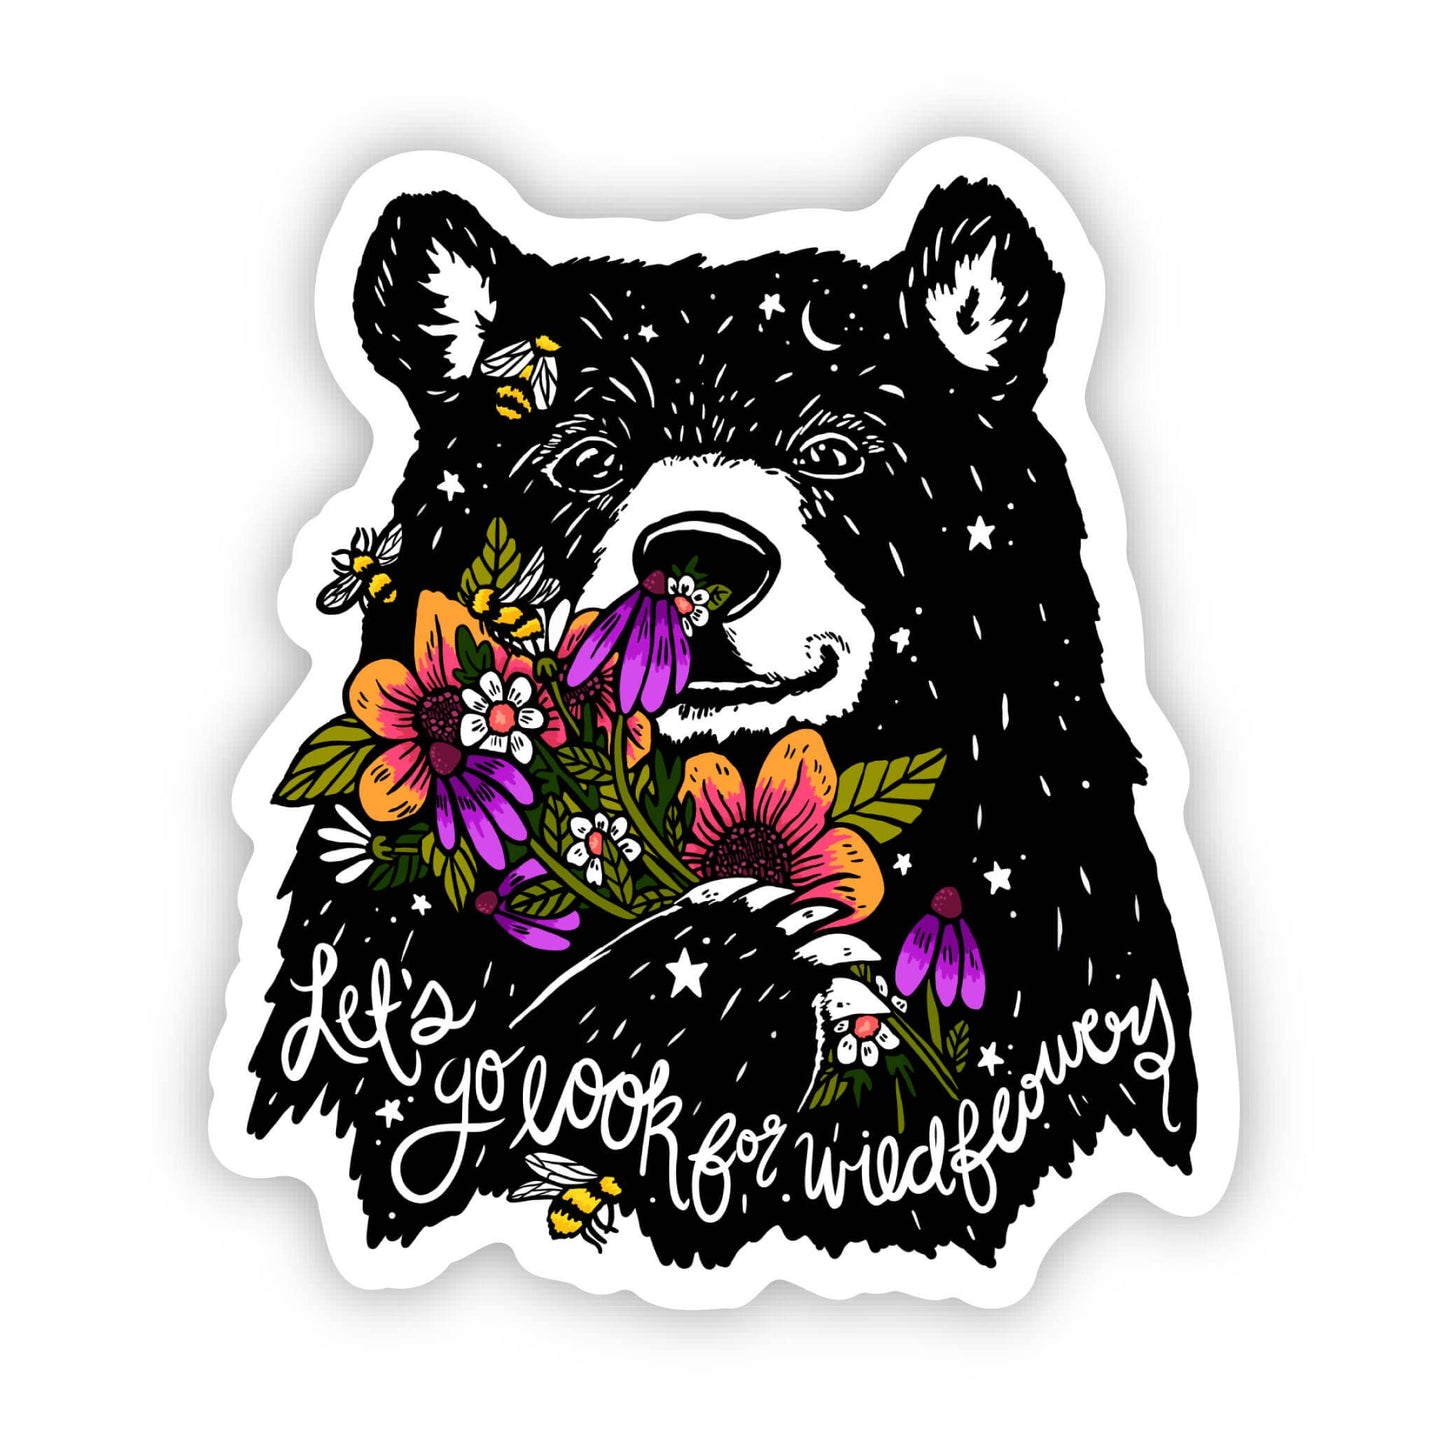 "Let's go look for wildflowers" bear sticker